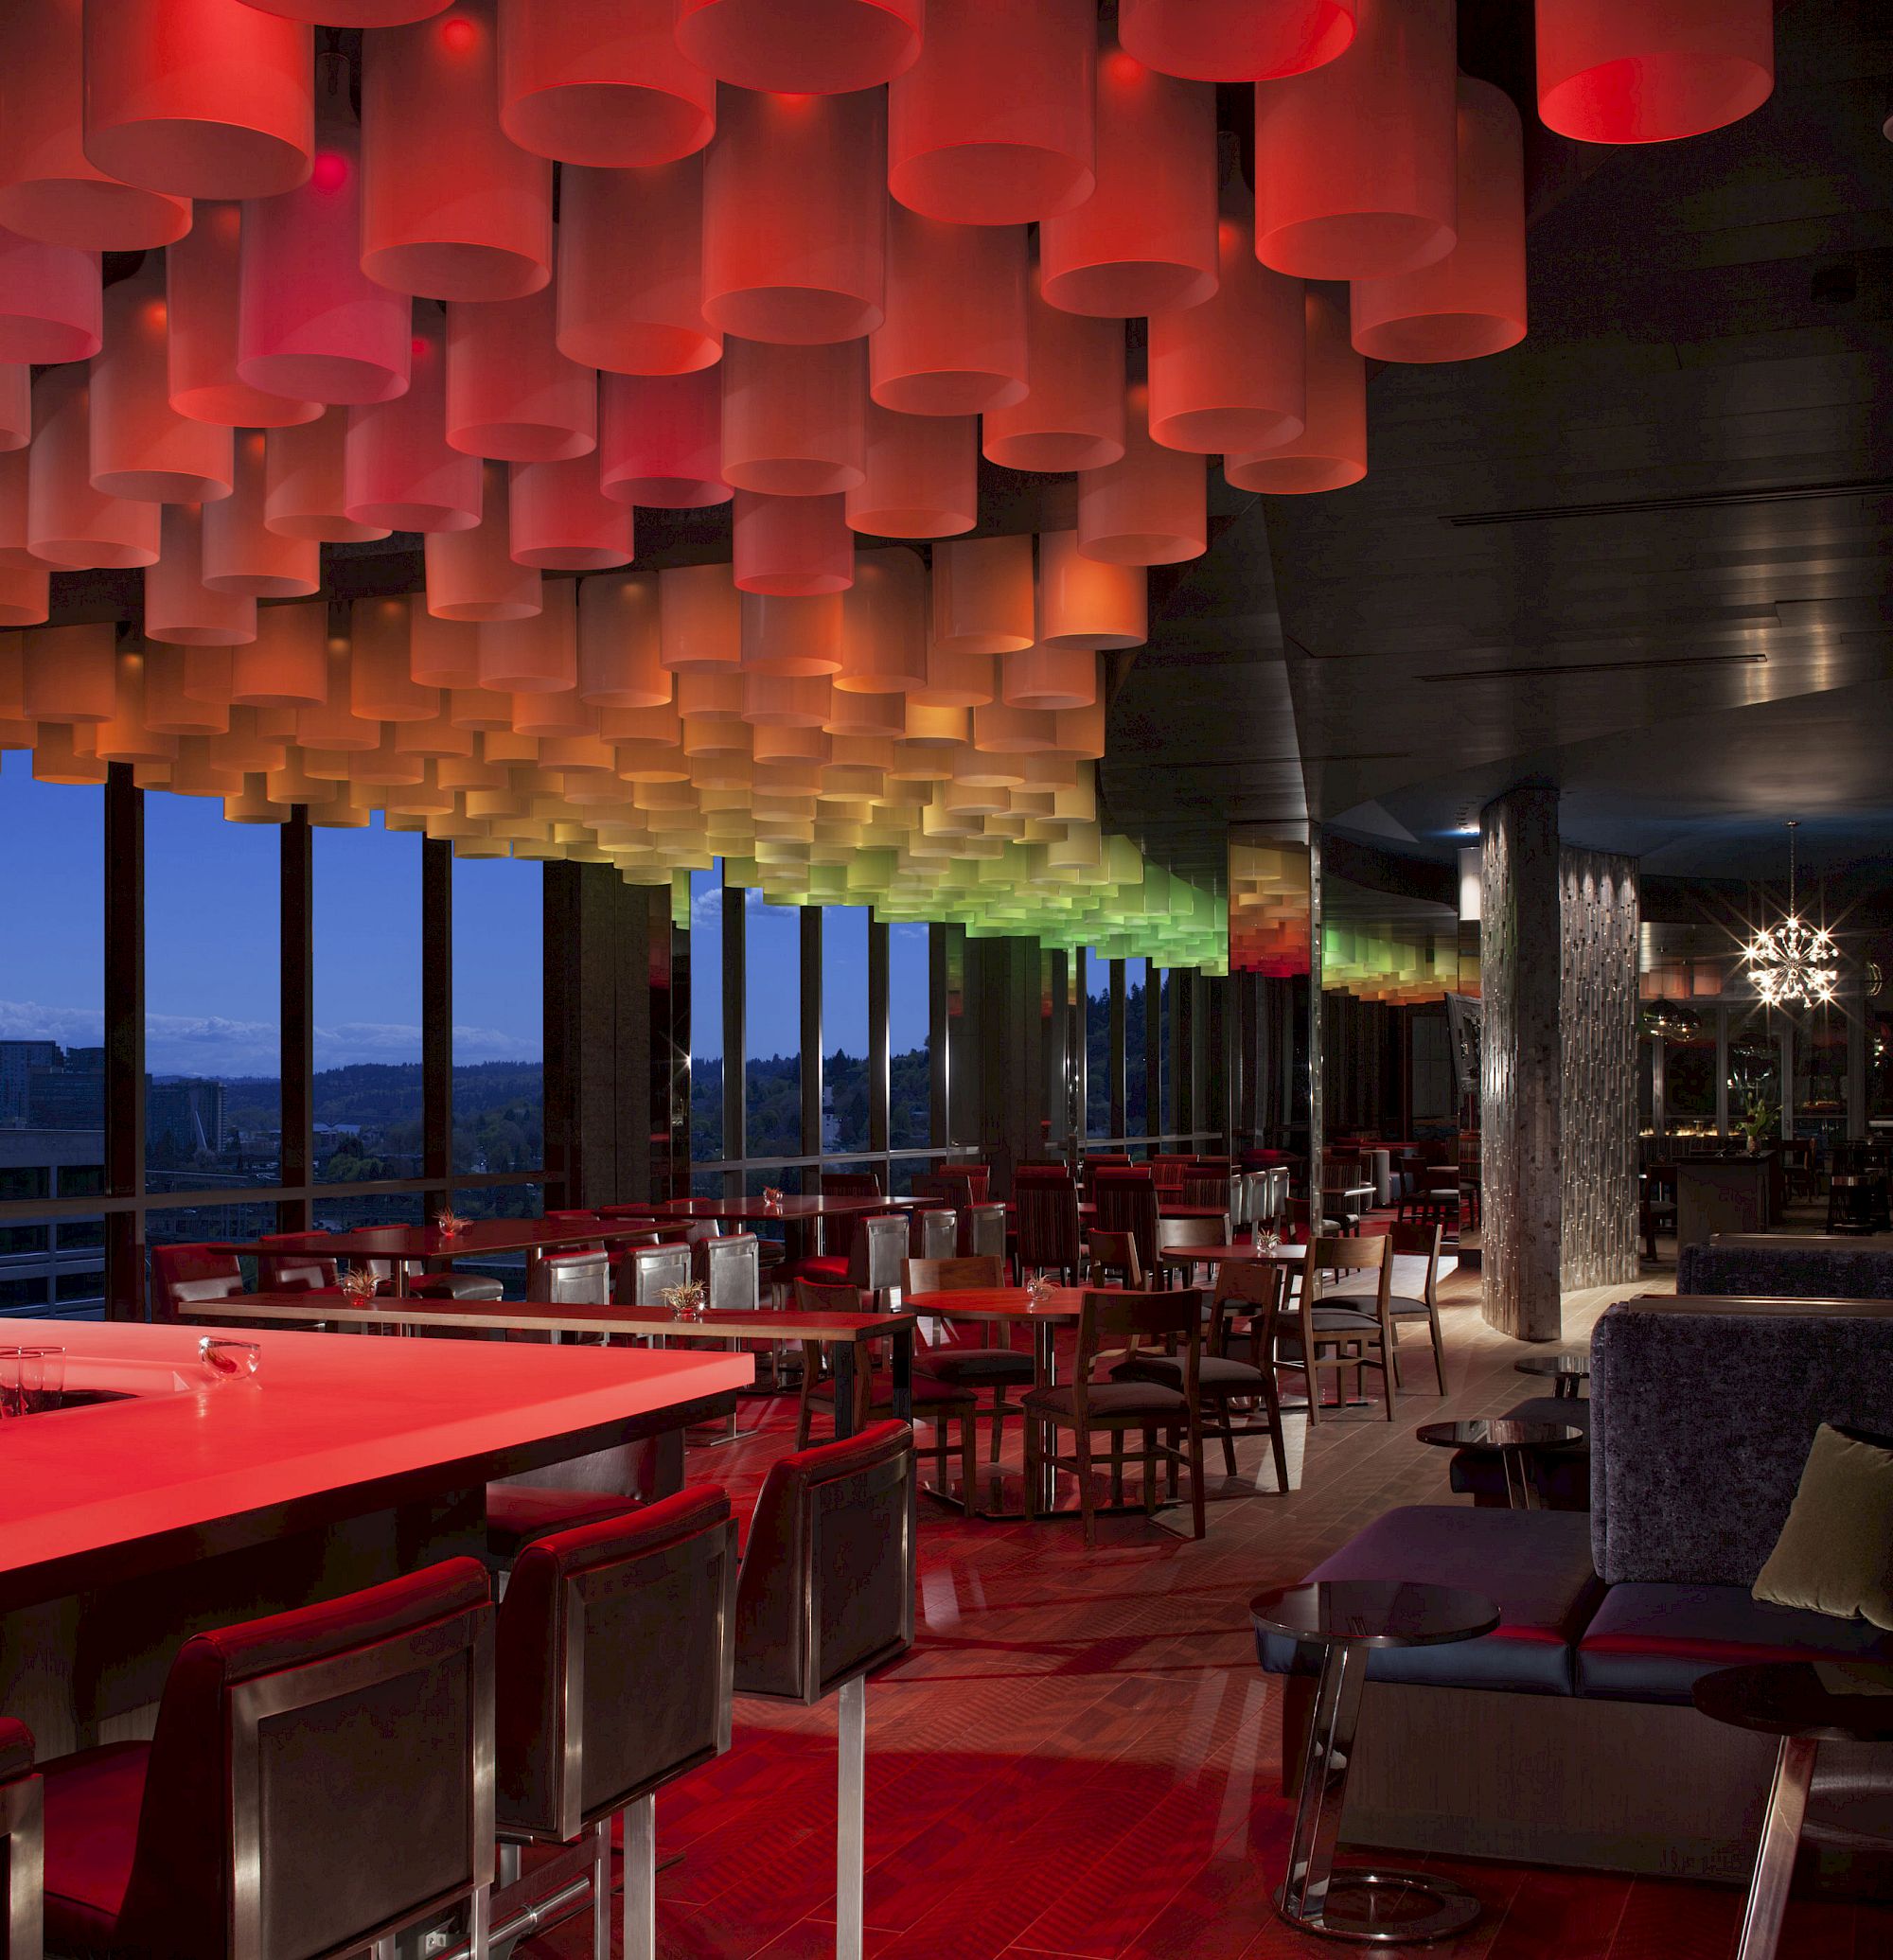 The image shows a modern, stylish bar or restaurant interior with colorful ceiling lights, high tables, and chairs, and large windows with a nighttime view.